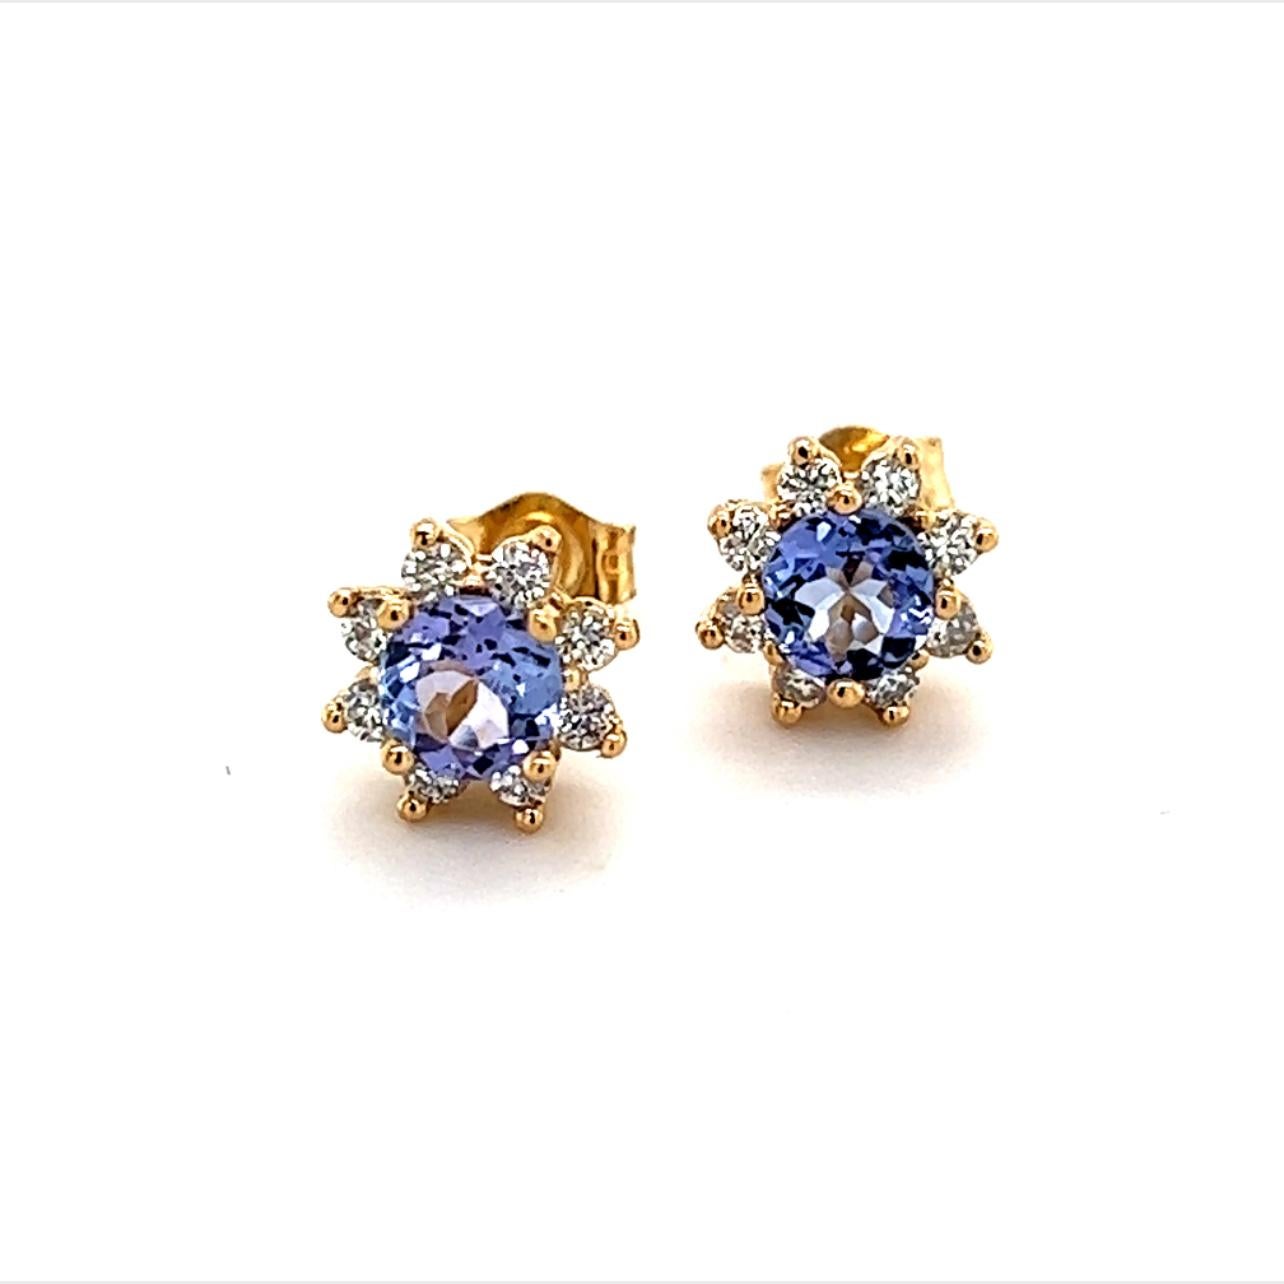 Natural Sapphire Diamond Earrings 14k Gold 1.0 TCW Certified $2,490 210747

This fine piece of jewelry is designed by Enrico Kassini!

Nothing says, “I Love you” more than Diamonds and Pearls!

These Sapphire have been Certified, Inspected, and